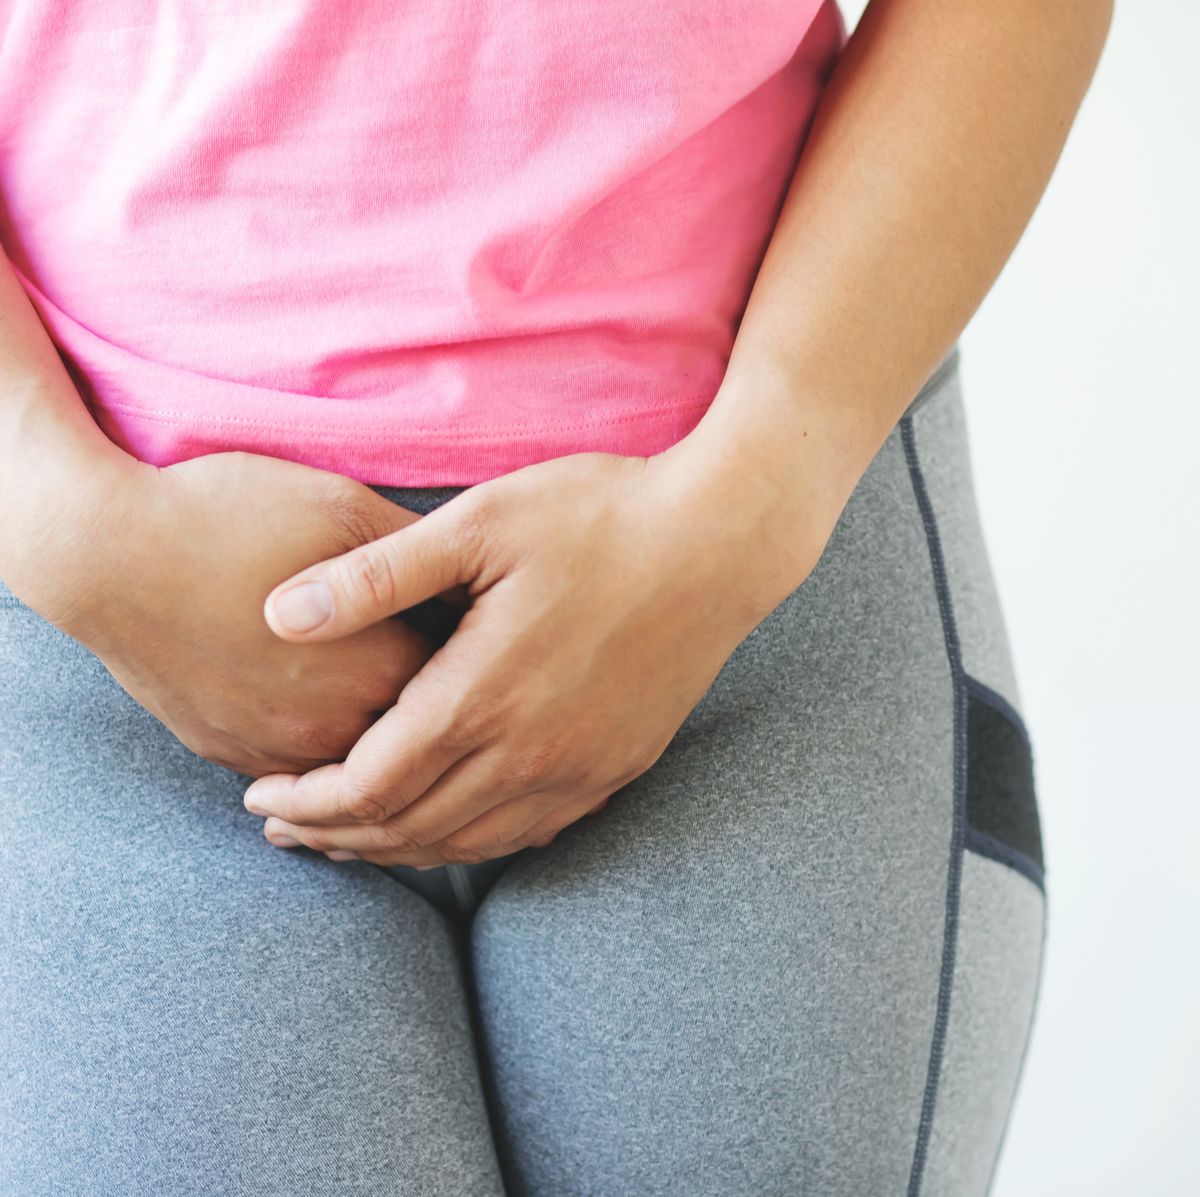 Itching Before Period: Causes, Treatments, and More